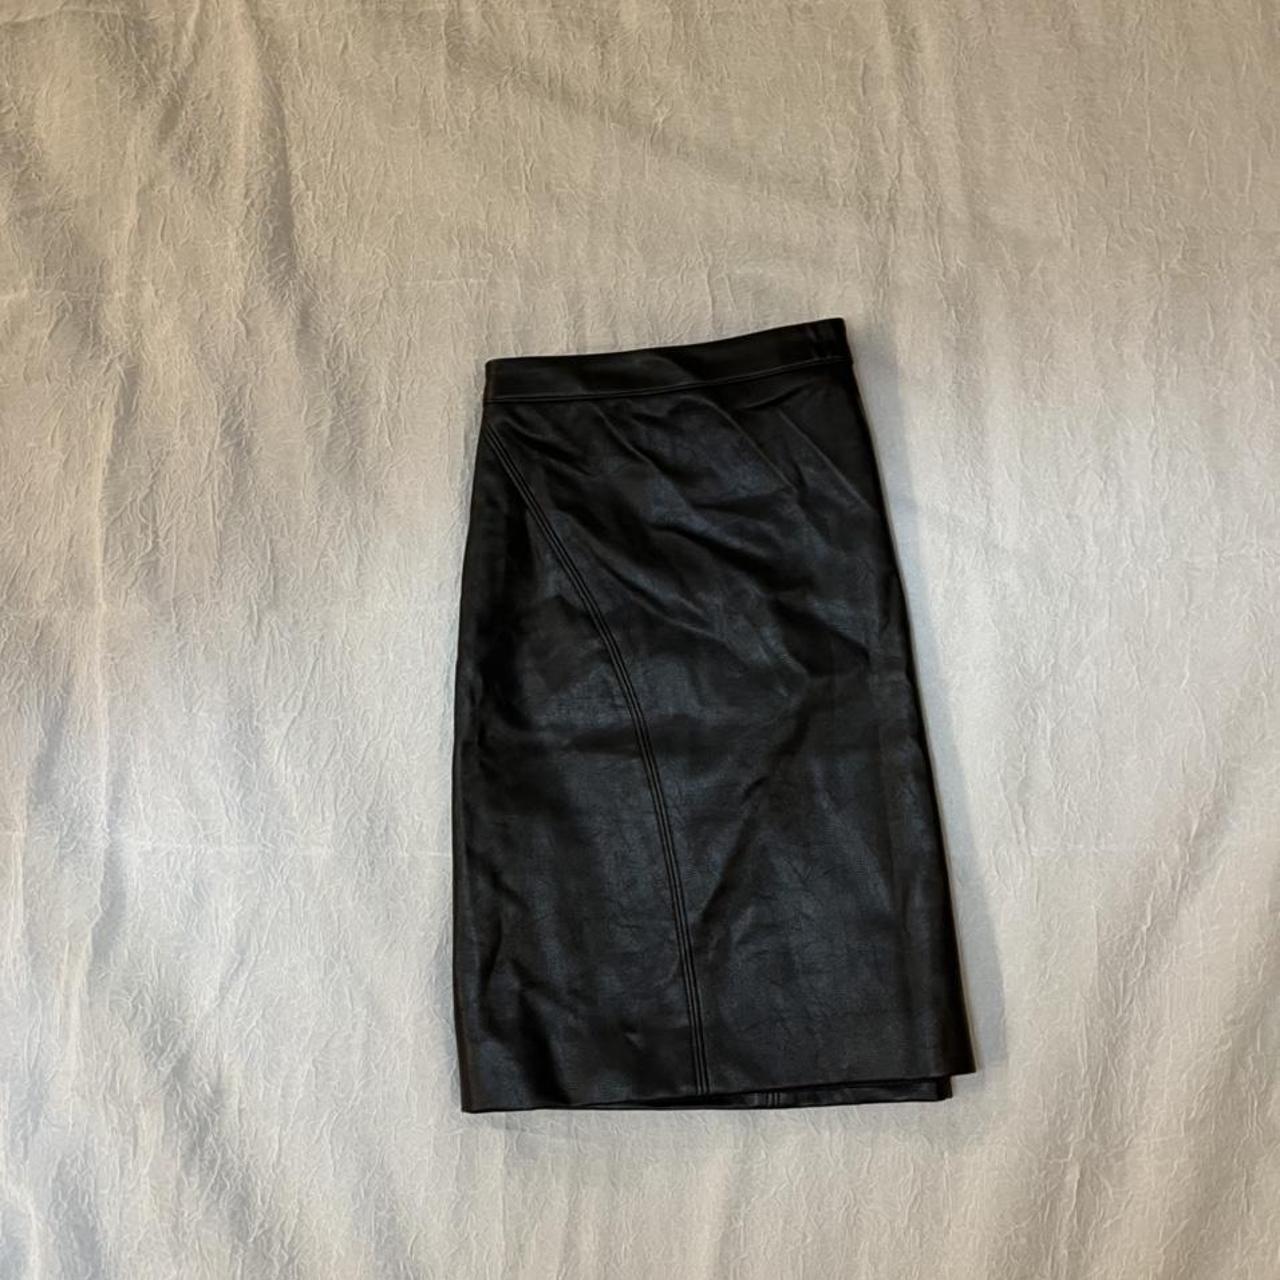 Urban outfitters leather skirt size large - Depop